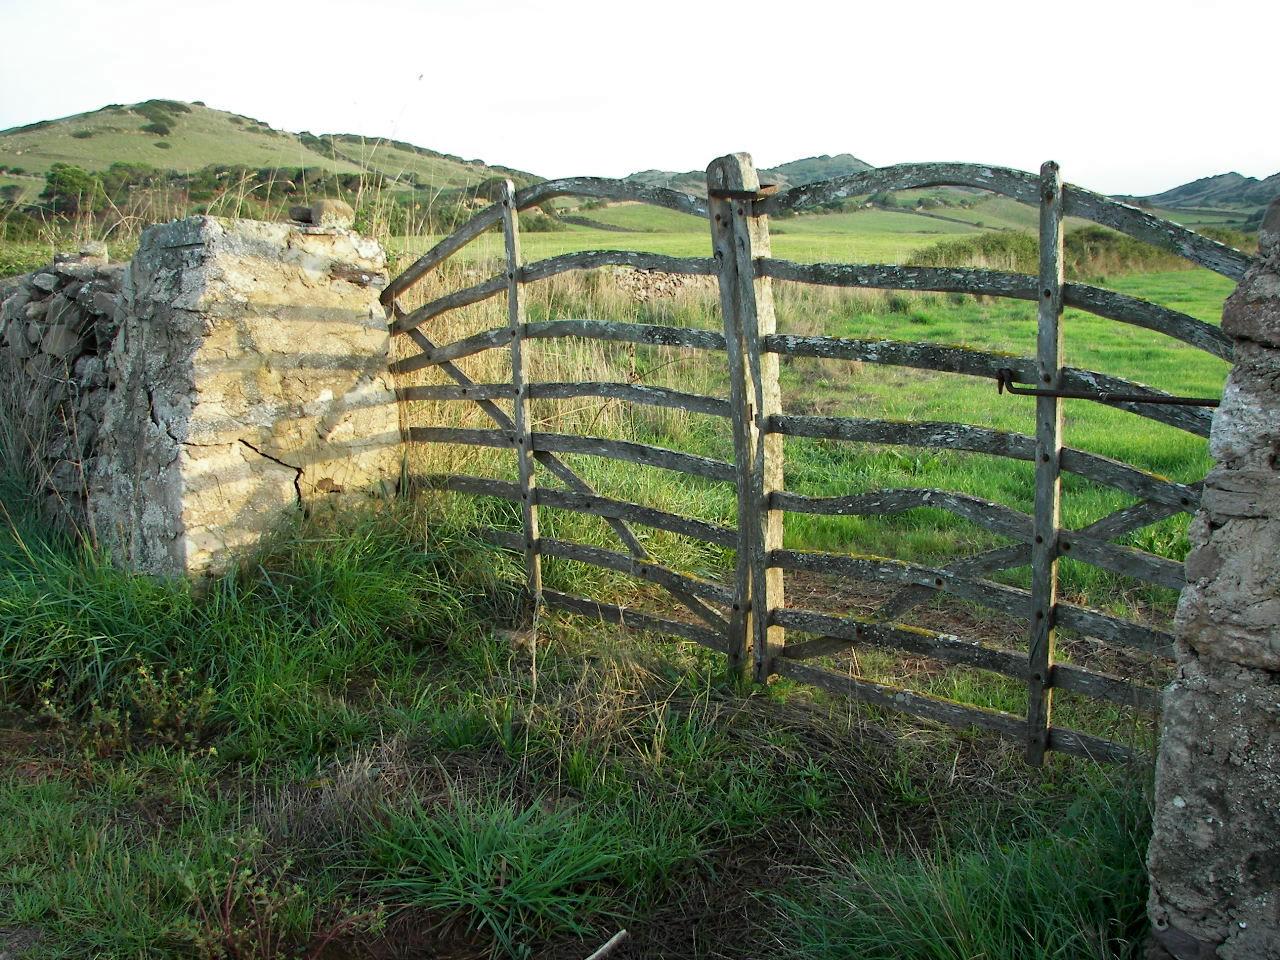 [Macaret+Outside+Typical+Gate+Countryside.JPG]